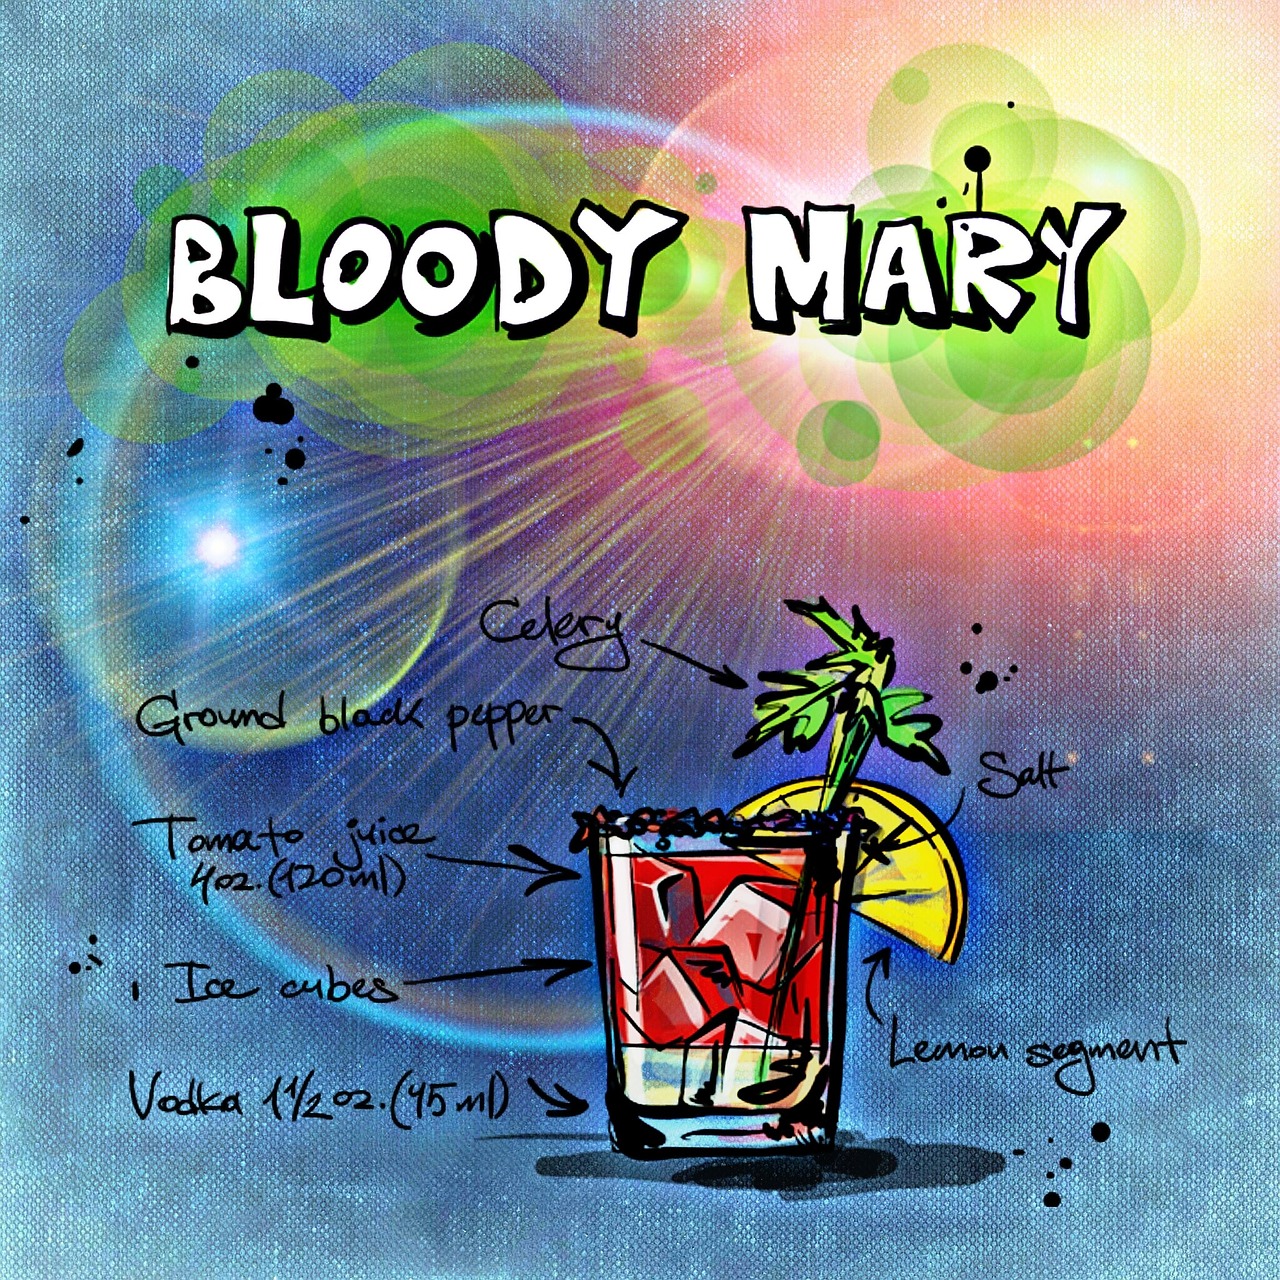 bloody mary cocktail drink free photo